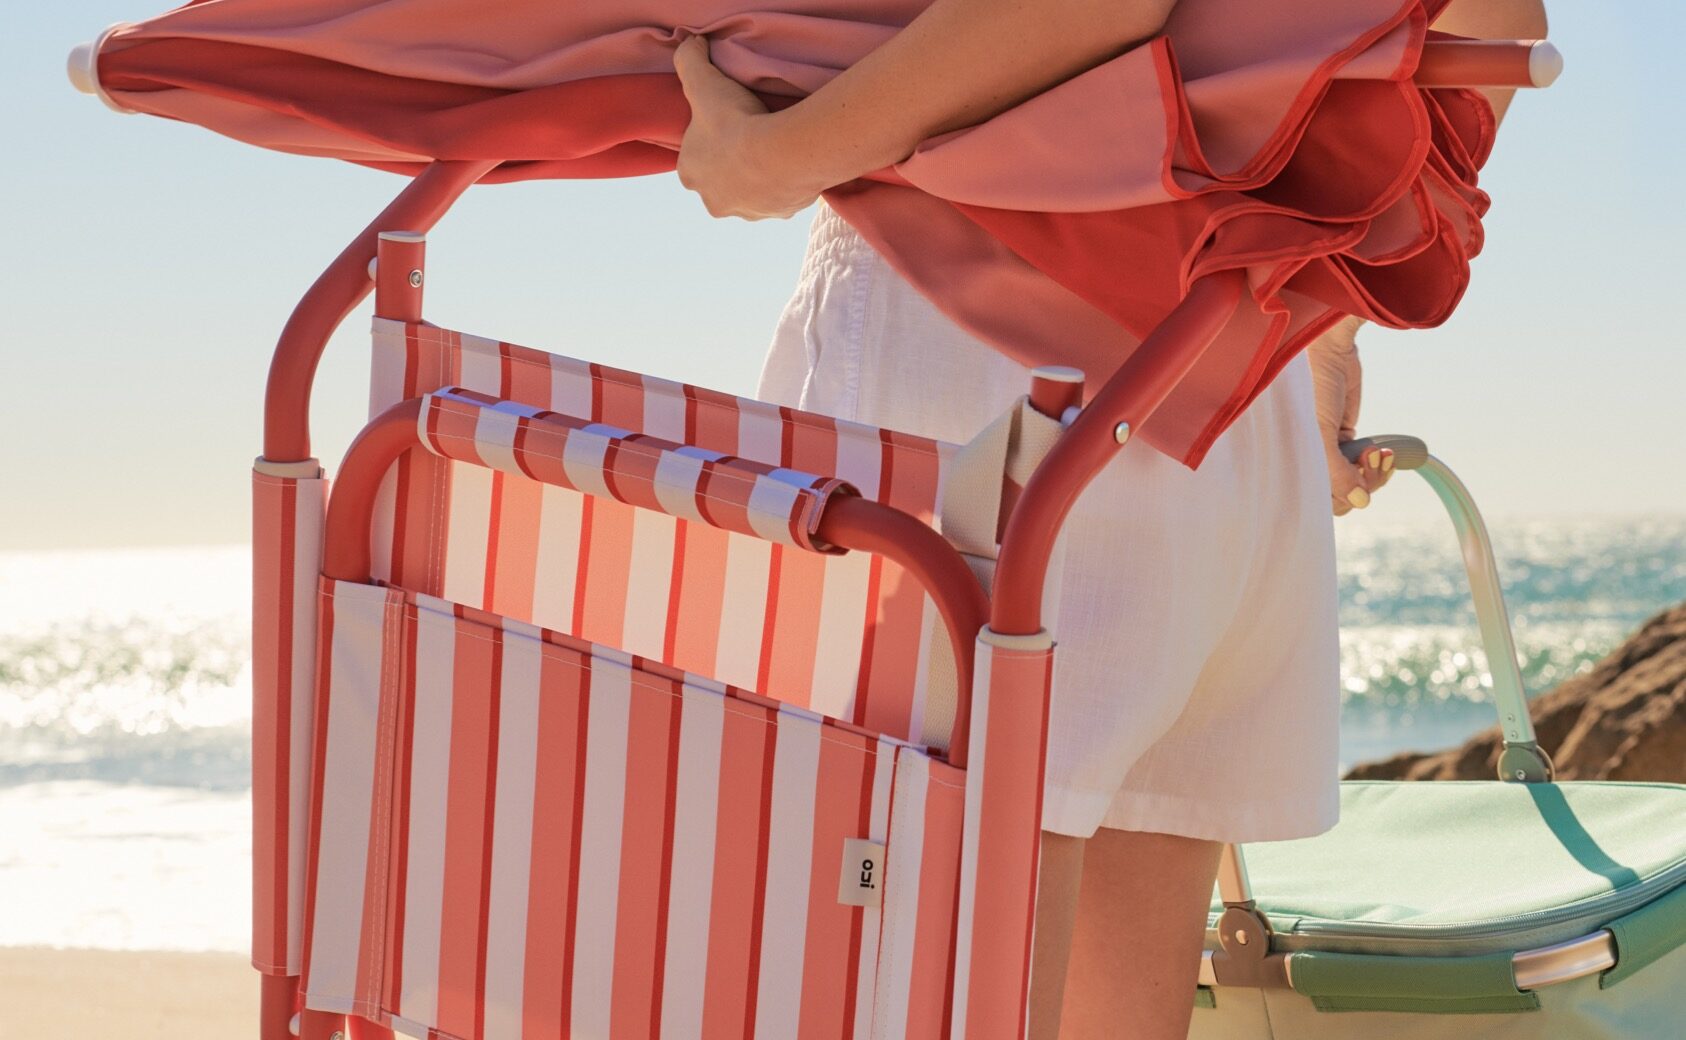 Model carrying OUI beach chair, umbrella and picnic basket.